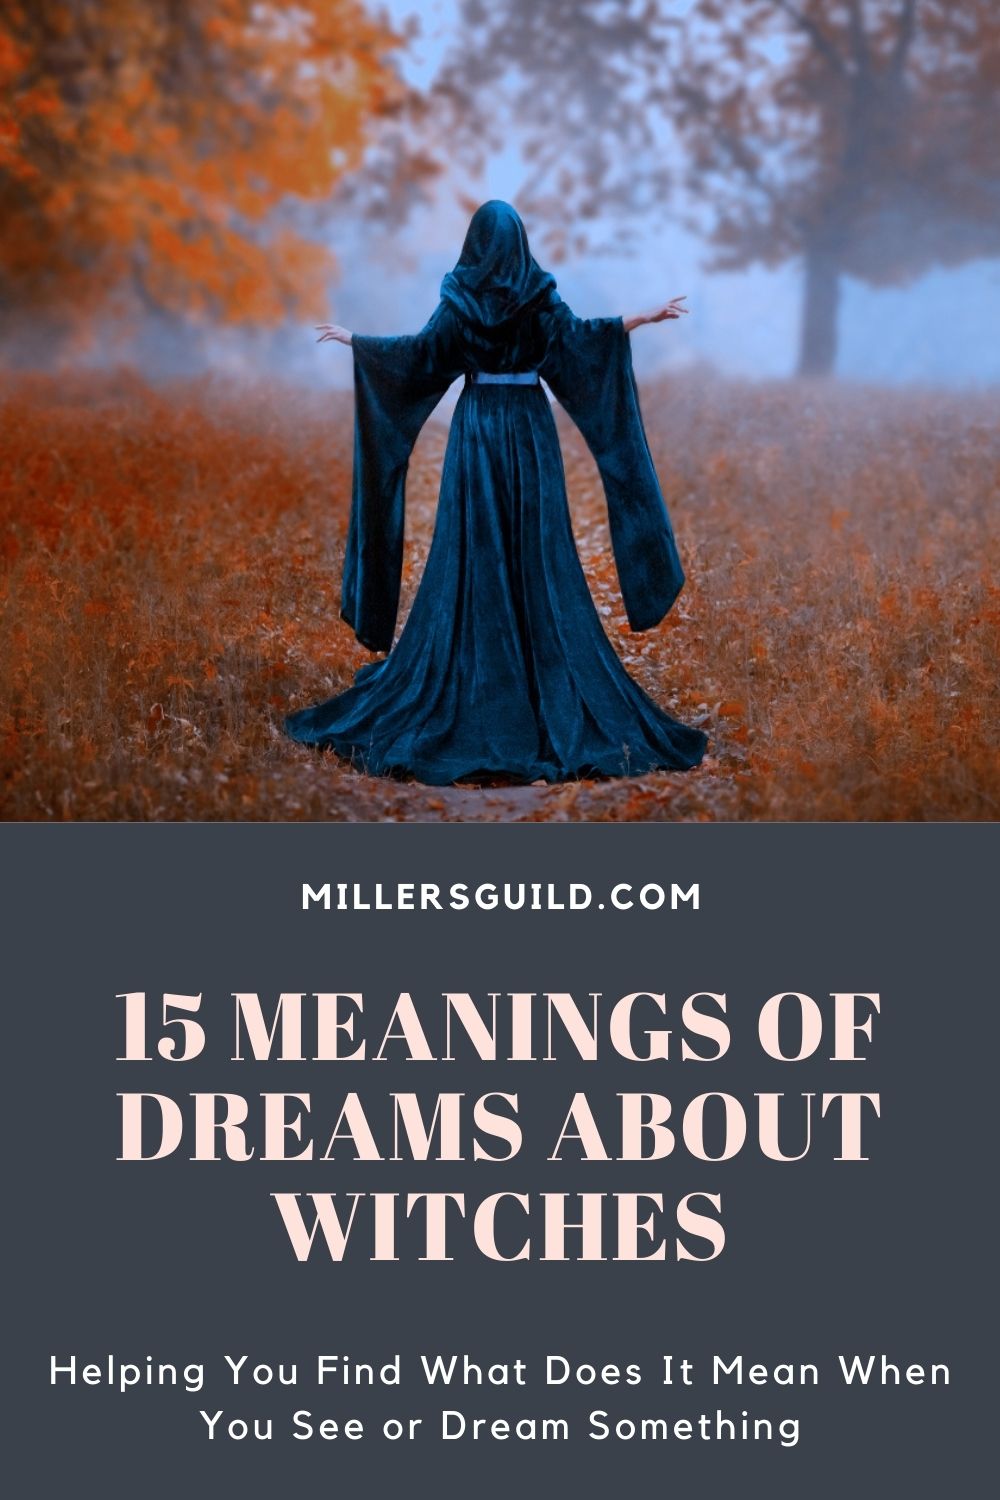 15 Meanings of Dreams About Witches 2